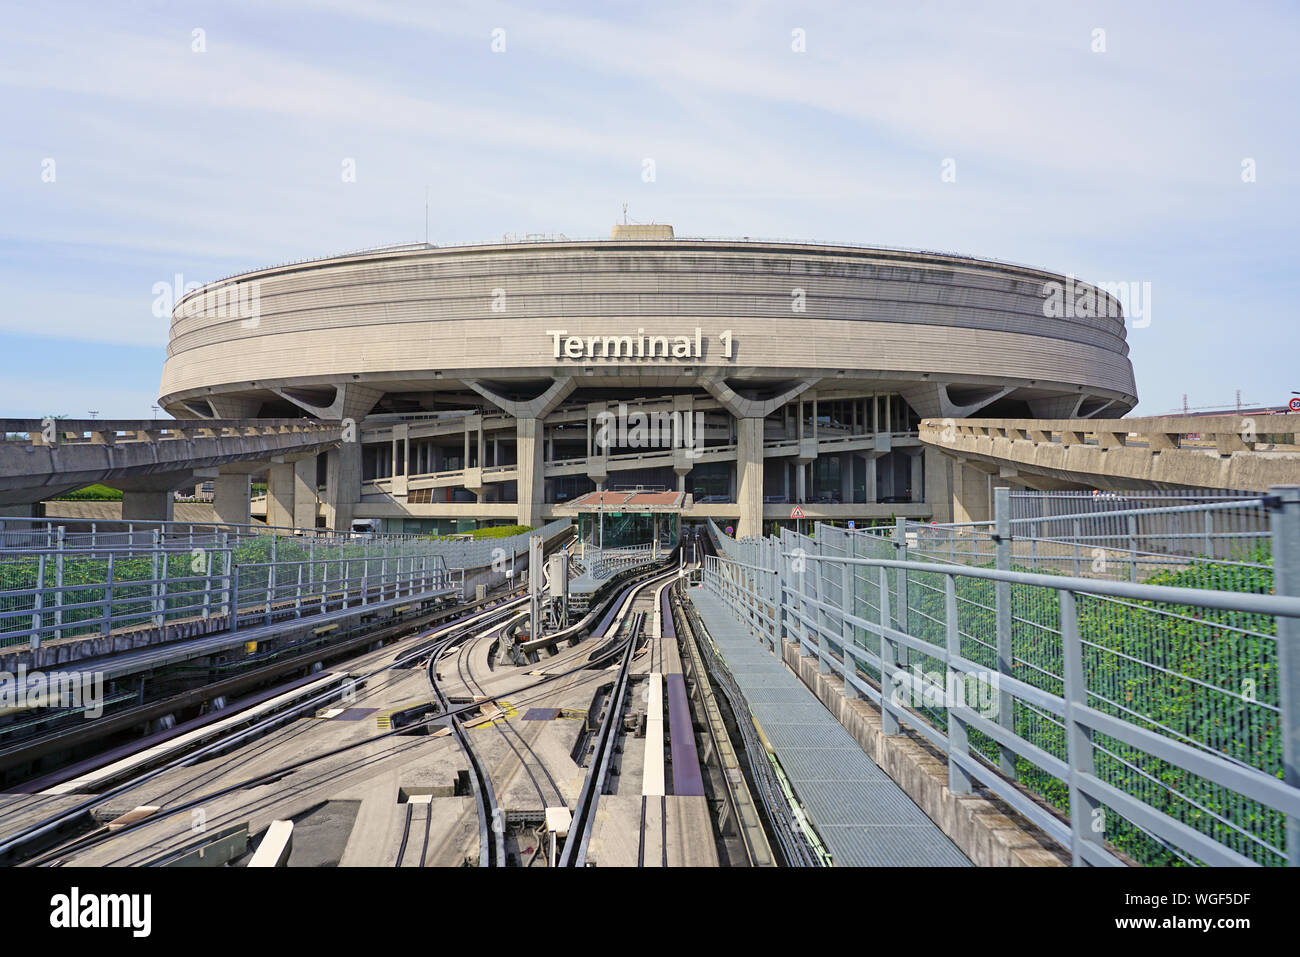 PARIS, FRANCE -21 AUG 2019- View of the Terminal 1 at the Roissy Charles de Gaulle International Airport (CDG) near Paris, France, designed by archite Stock Photo